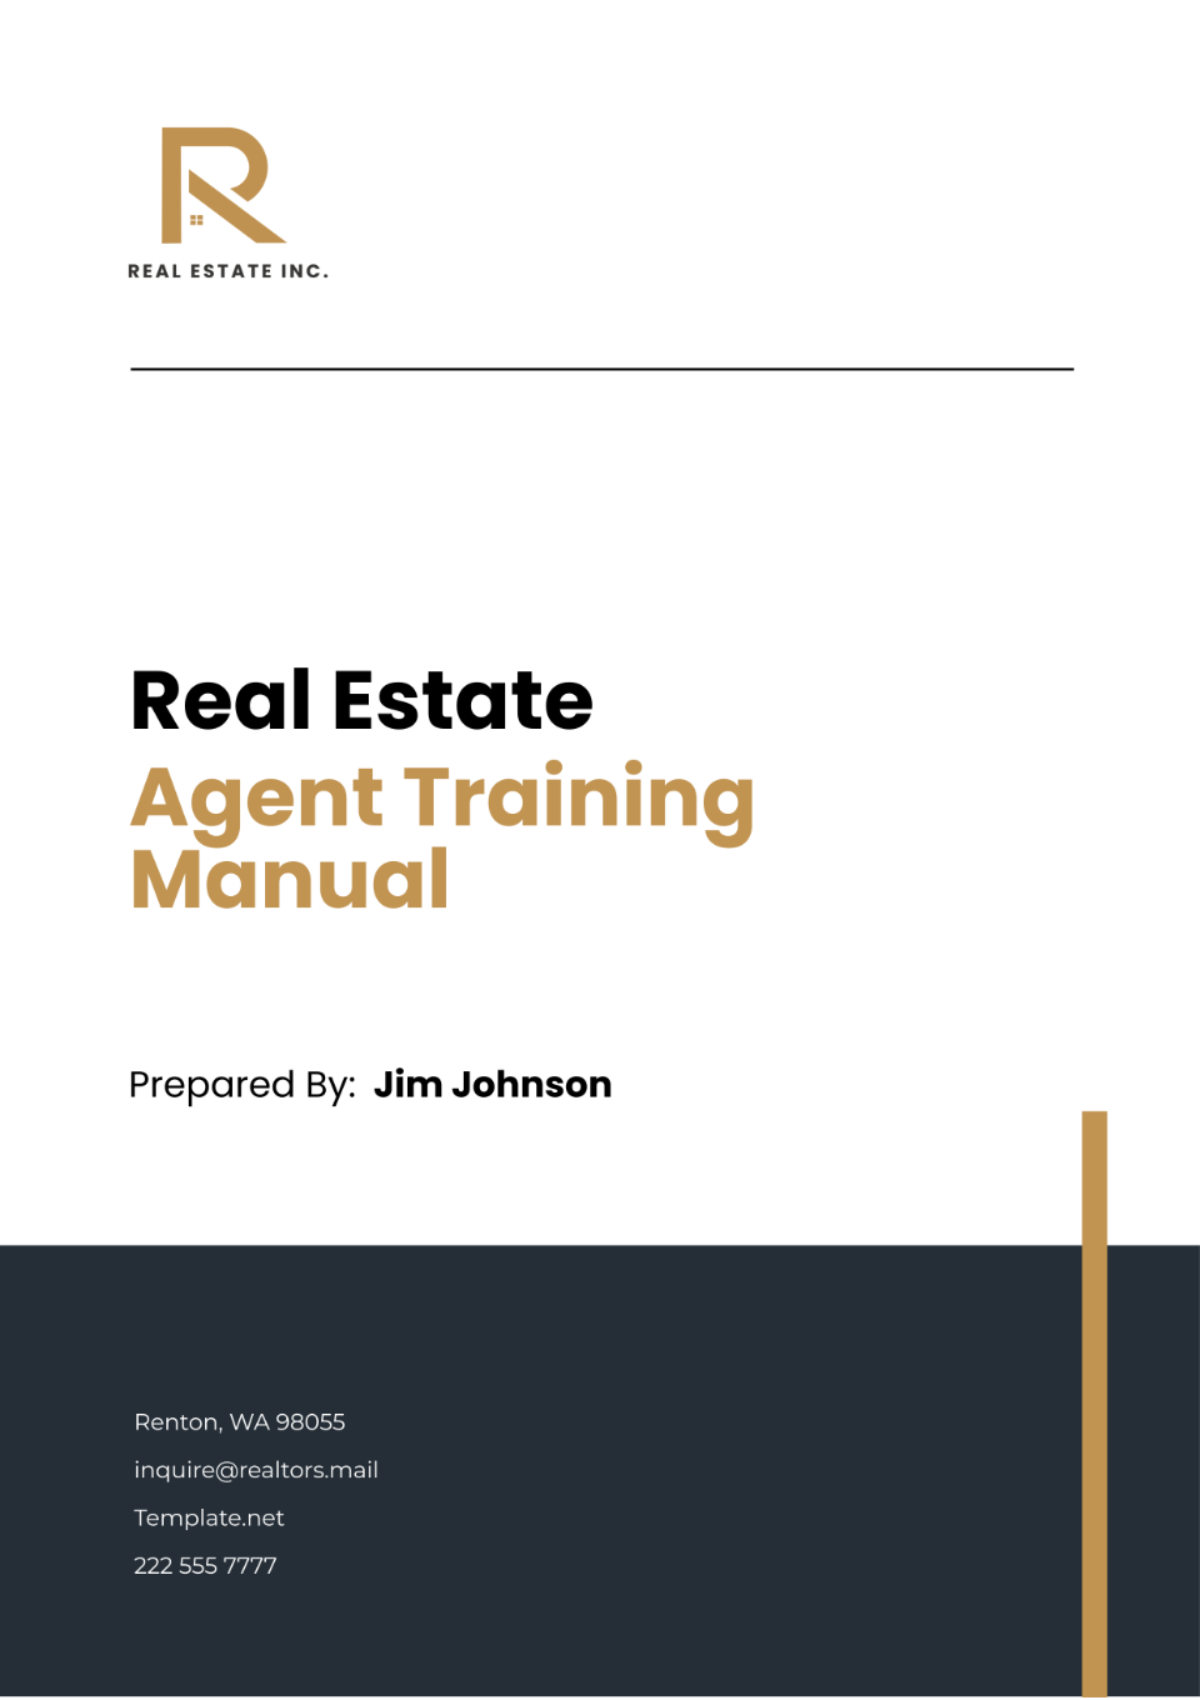 Real Estate Agent Training Manual Template